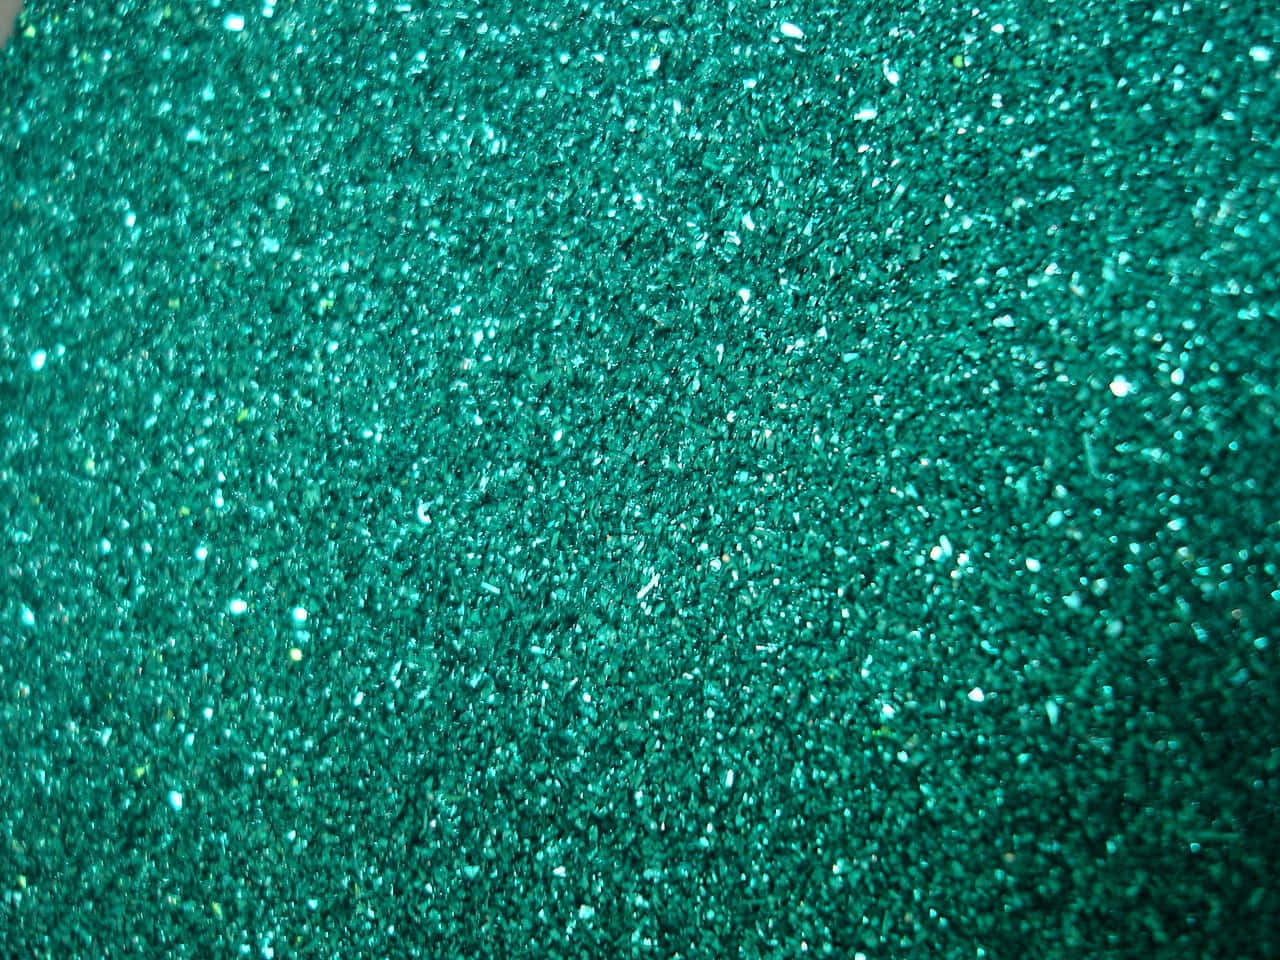 "Add a splash of glitter to your life with this teal glitter background"